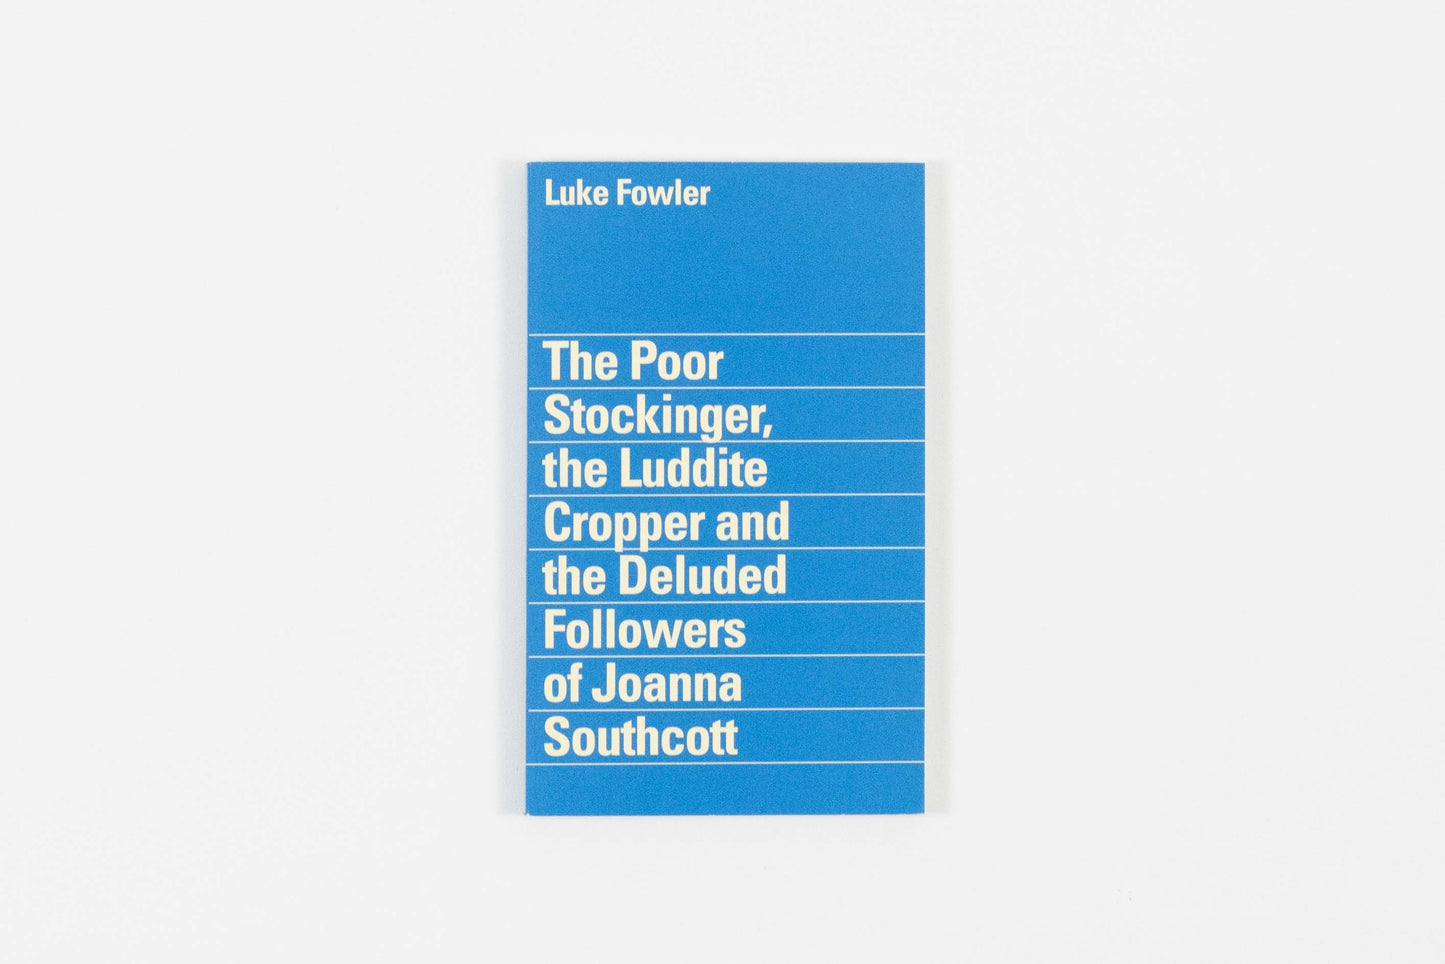 Luke Fowler - The Poor Stockinger, the Luddite Cropper and the Deluded Followers of Joanna Southcott